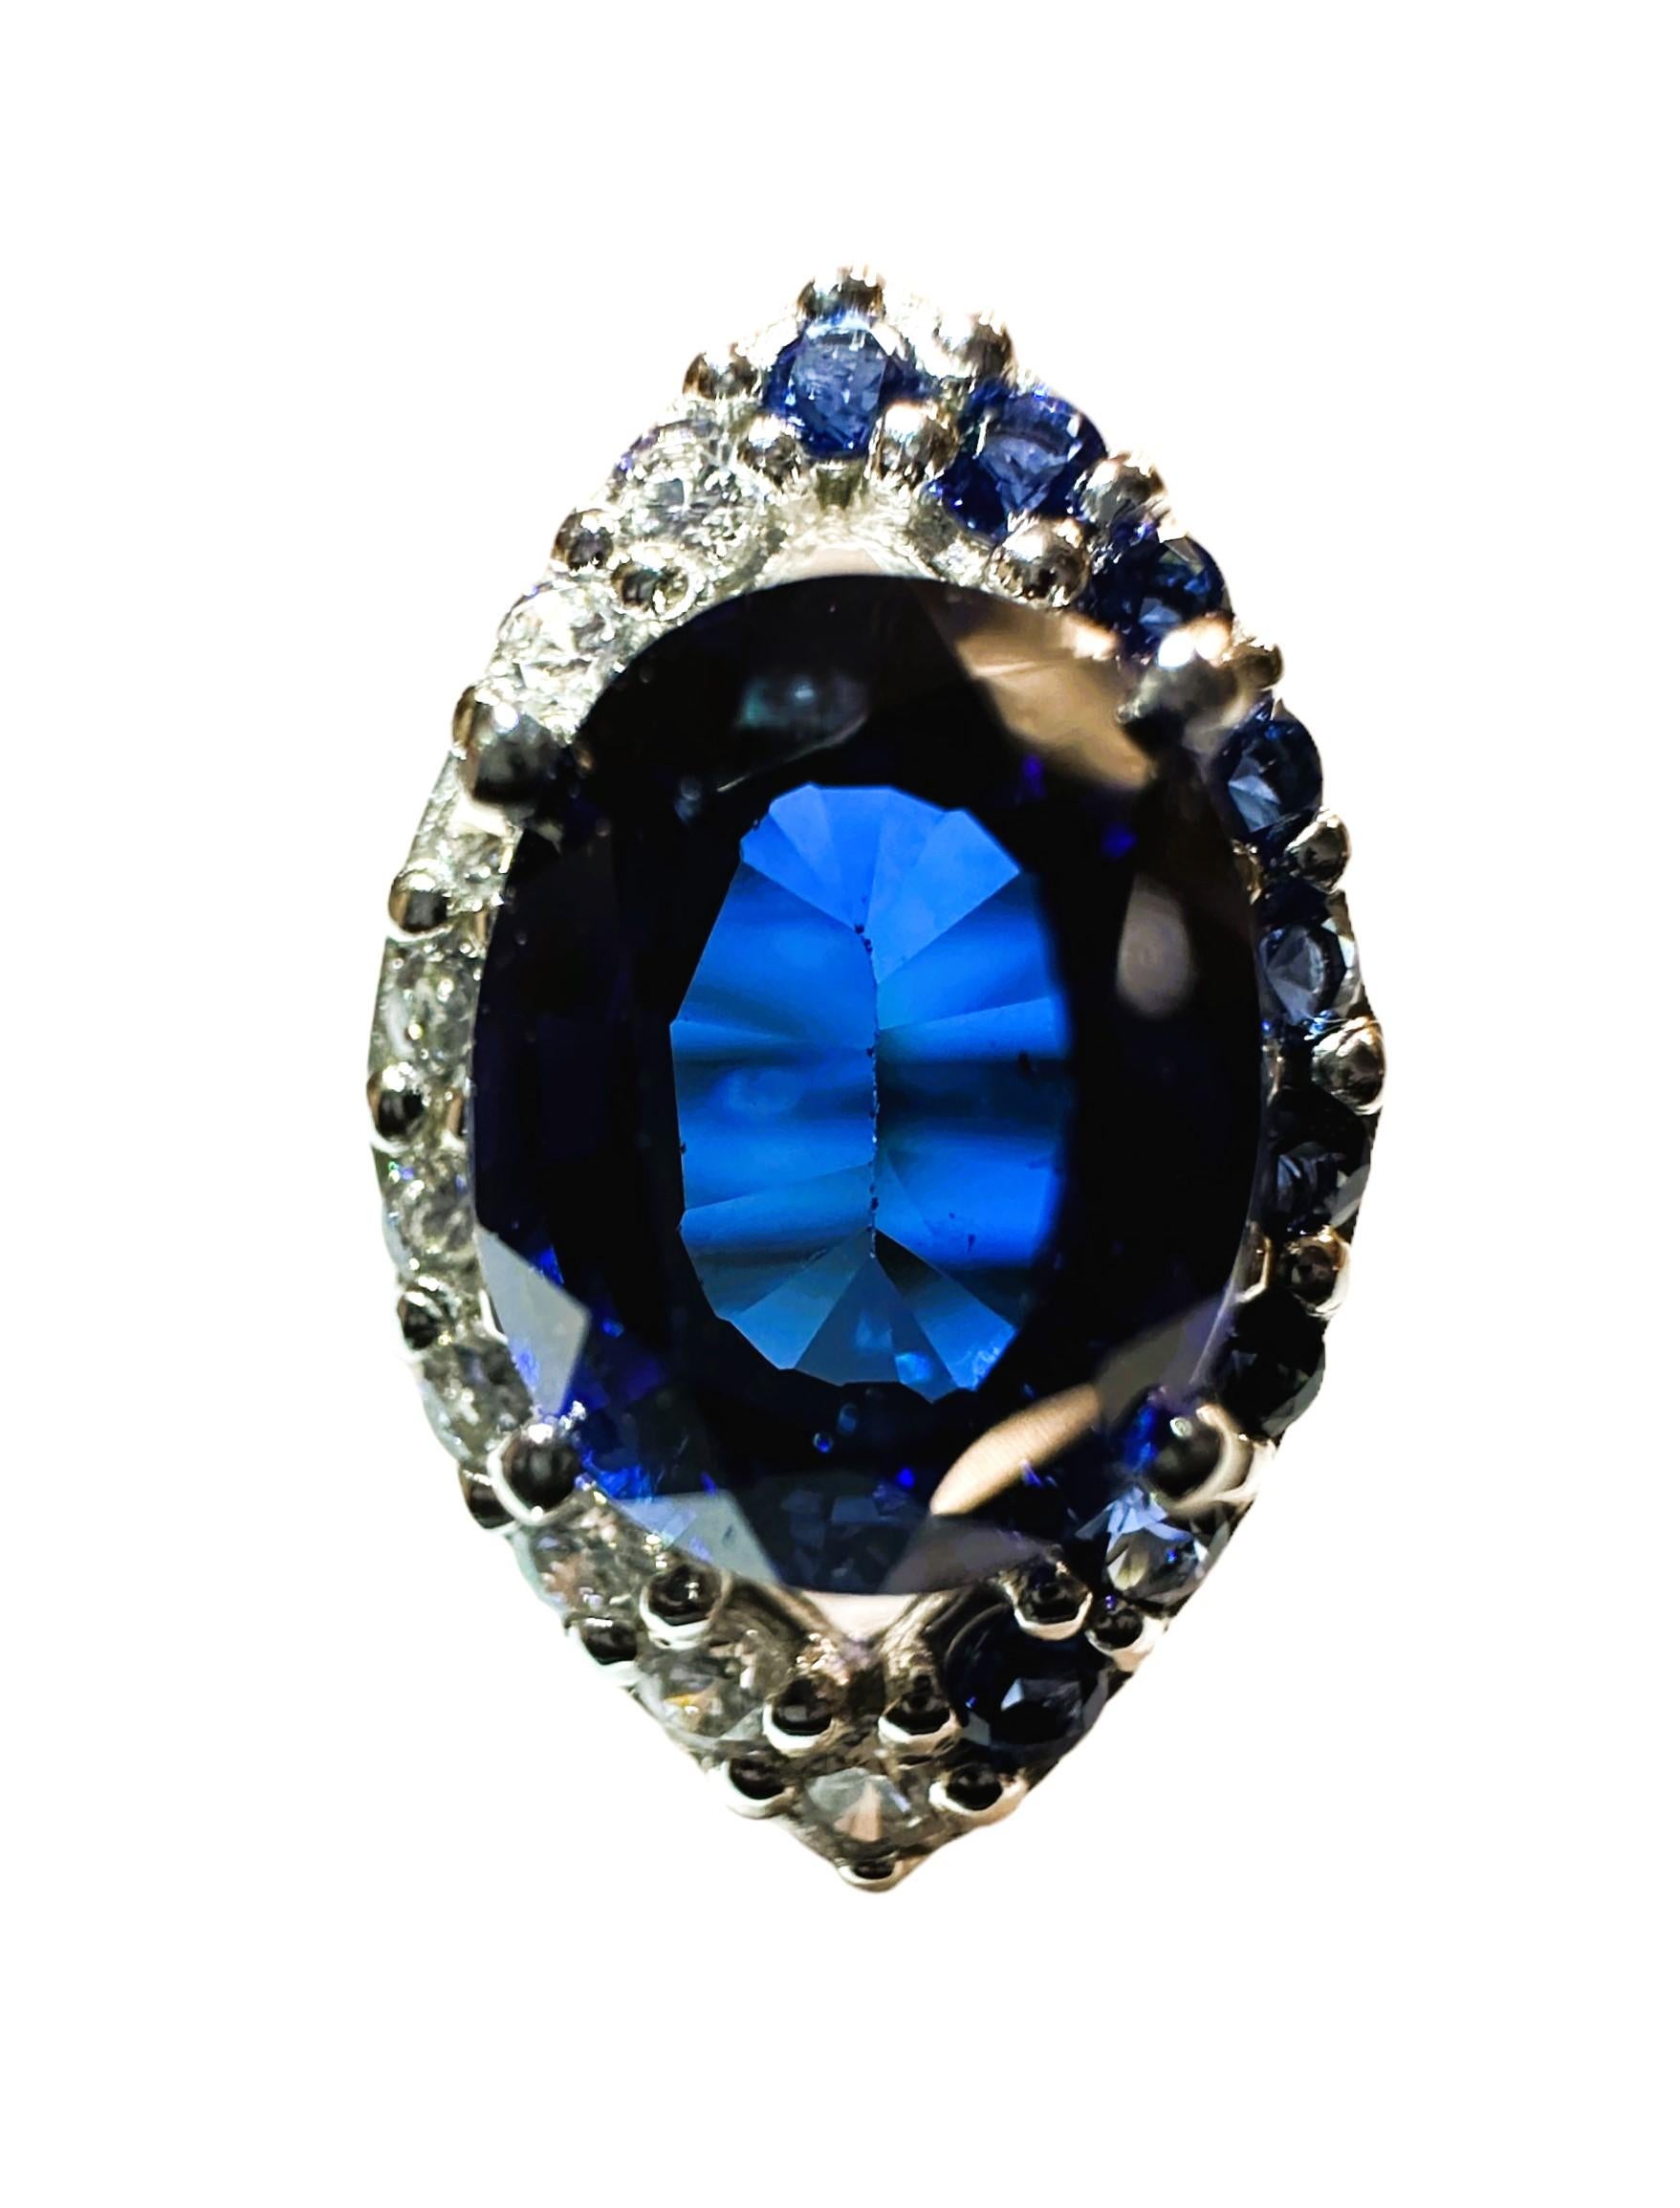 The ring is a size 6.75 and has just a beautiful and brilliant sapphire stone.  It is a high quality stone.  The stone is an oval cut stone and is 3.60 cts.   It measures 9 x 7 mm.  The stone has diamond cut blue sapphires on one side and diamond